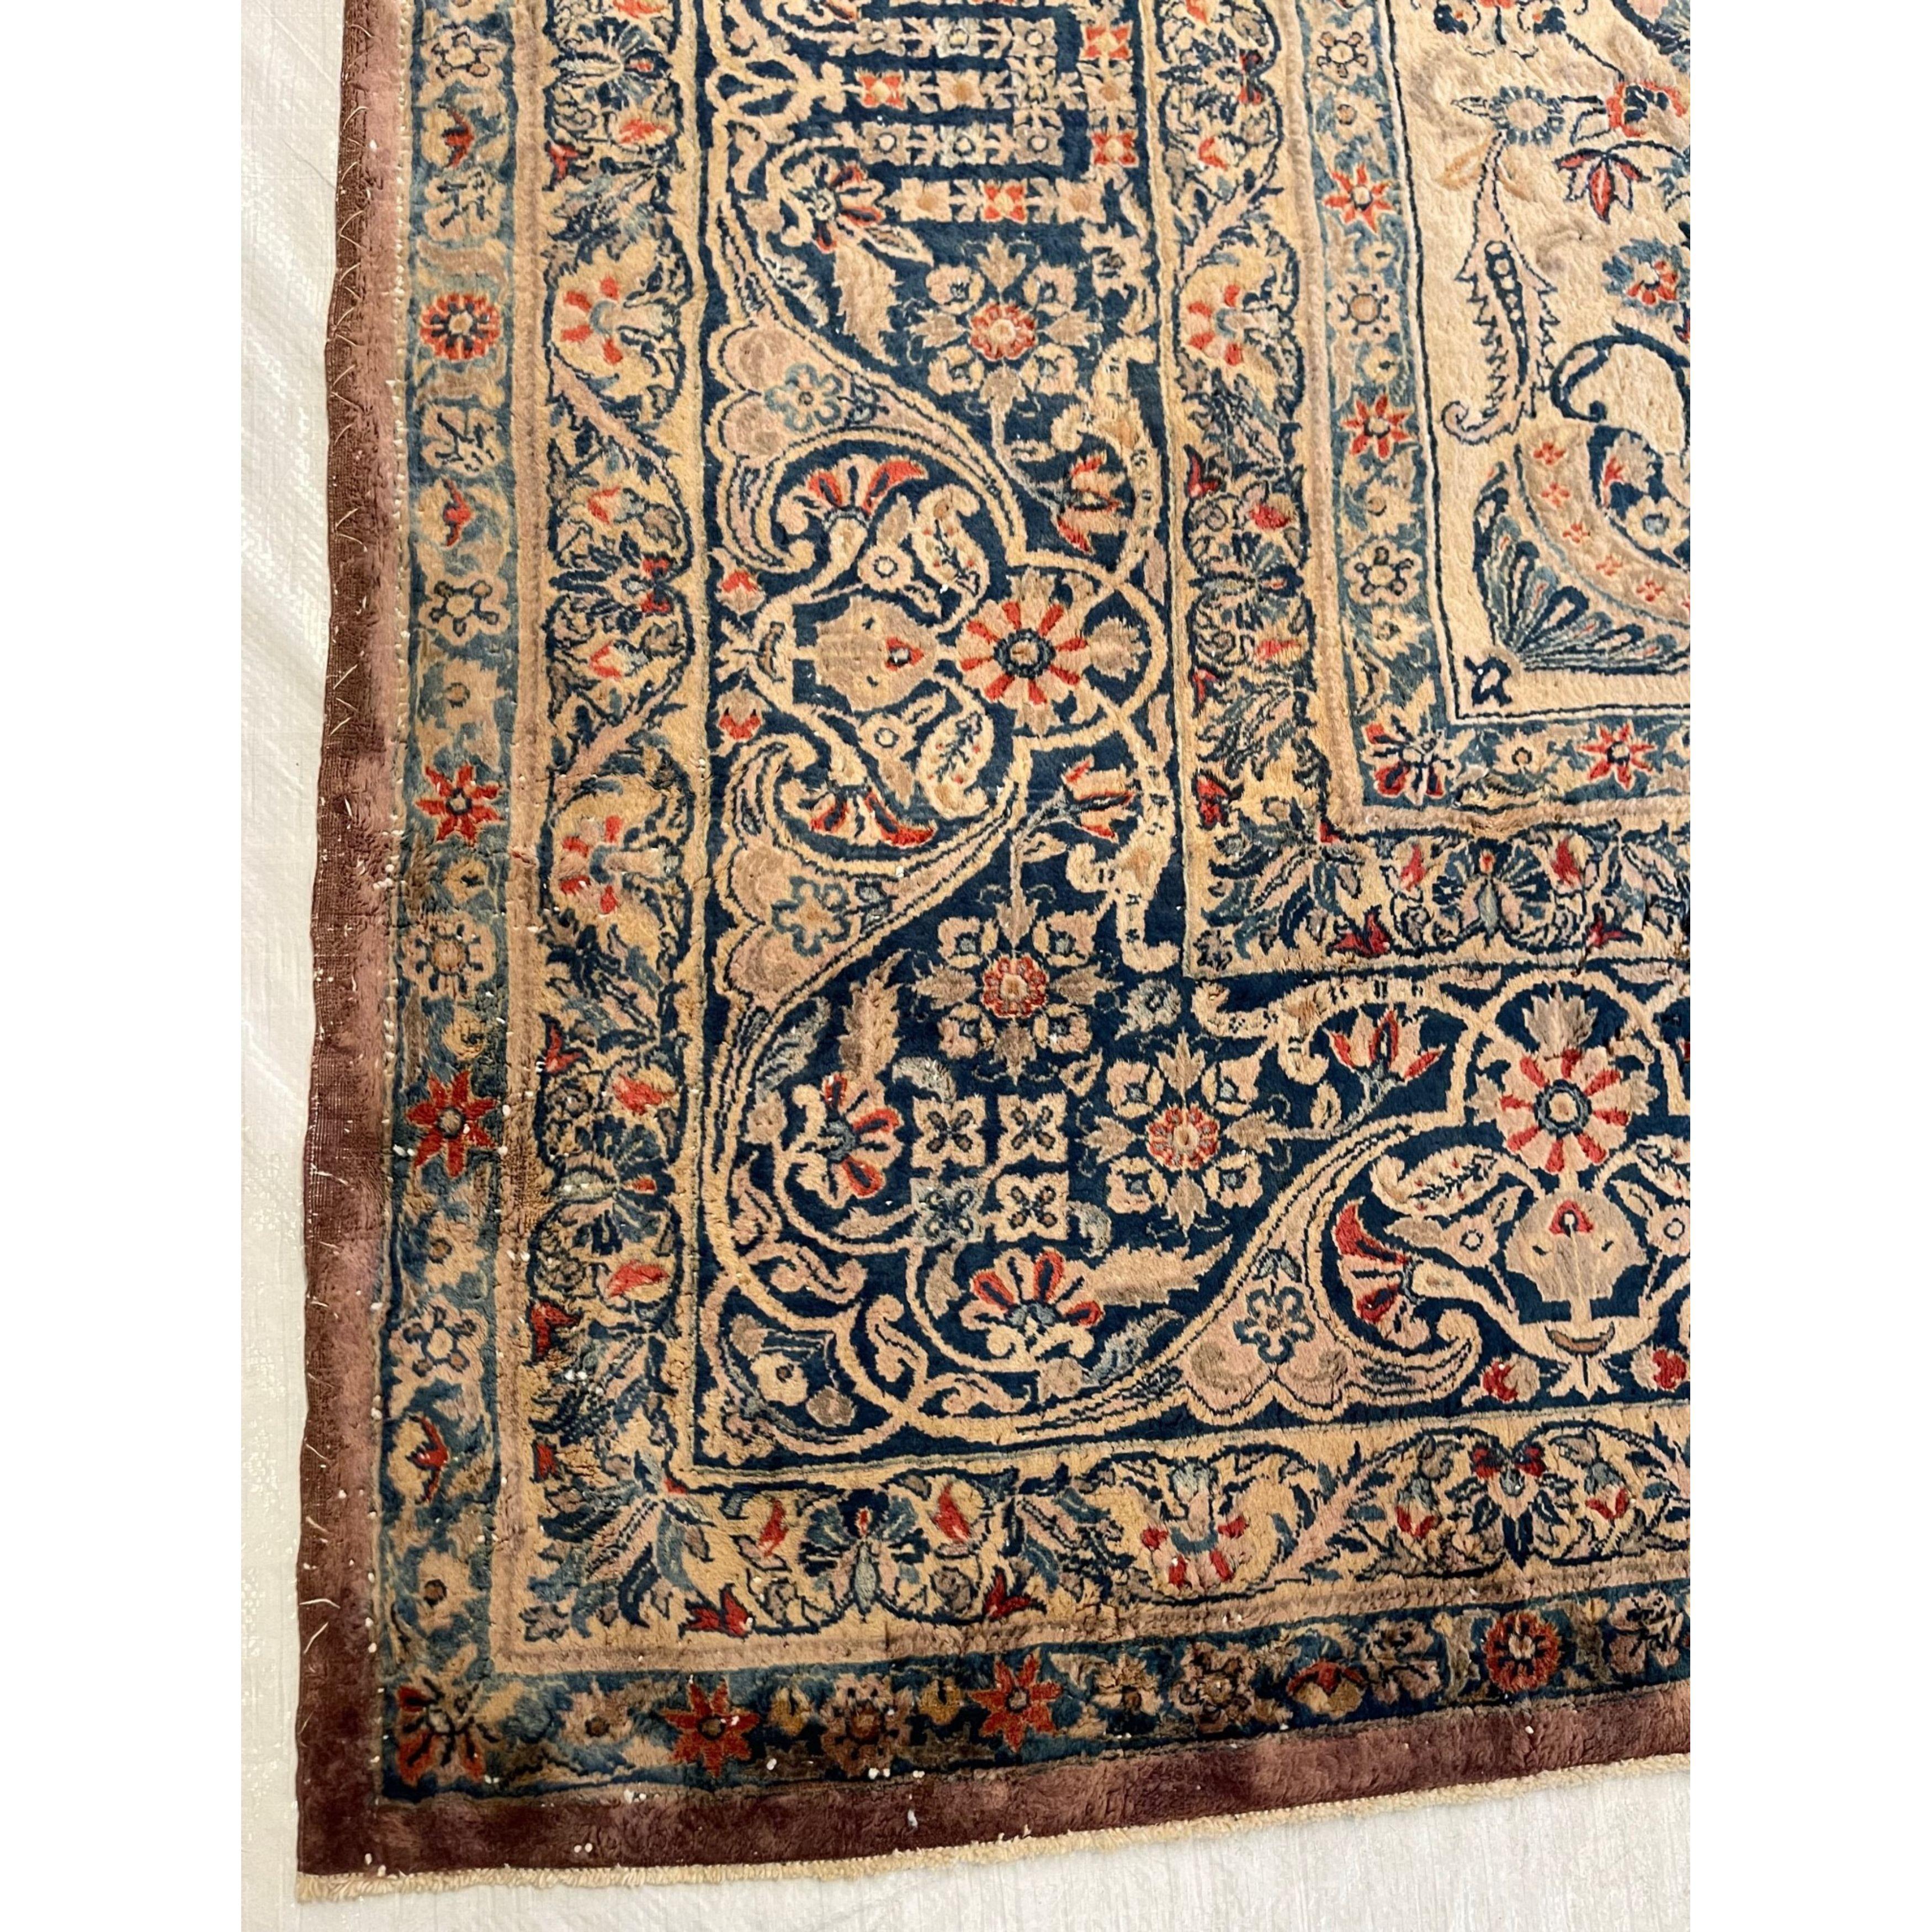 Antique Persian Mohtashem Rugs – Antique Rugs By Mohtashem From Kashan – Ustad Mohtashem is one of the most revered weavers of Kashan. His rugs are some of the highest quality Persian weaving. The town of Kashan located in central Iran between